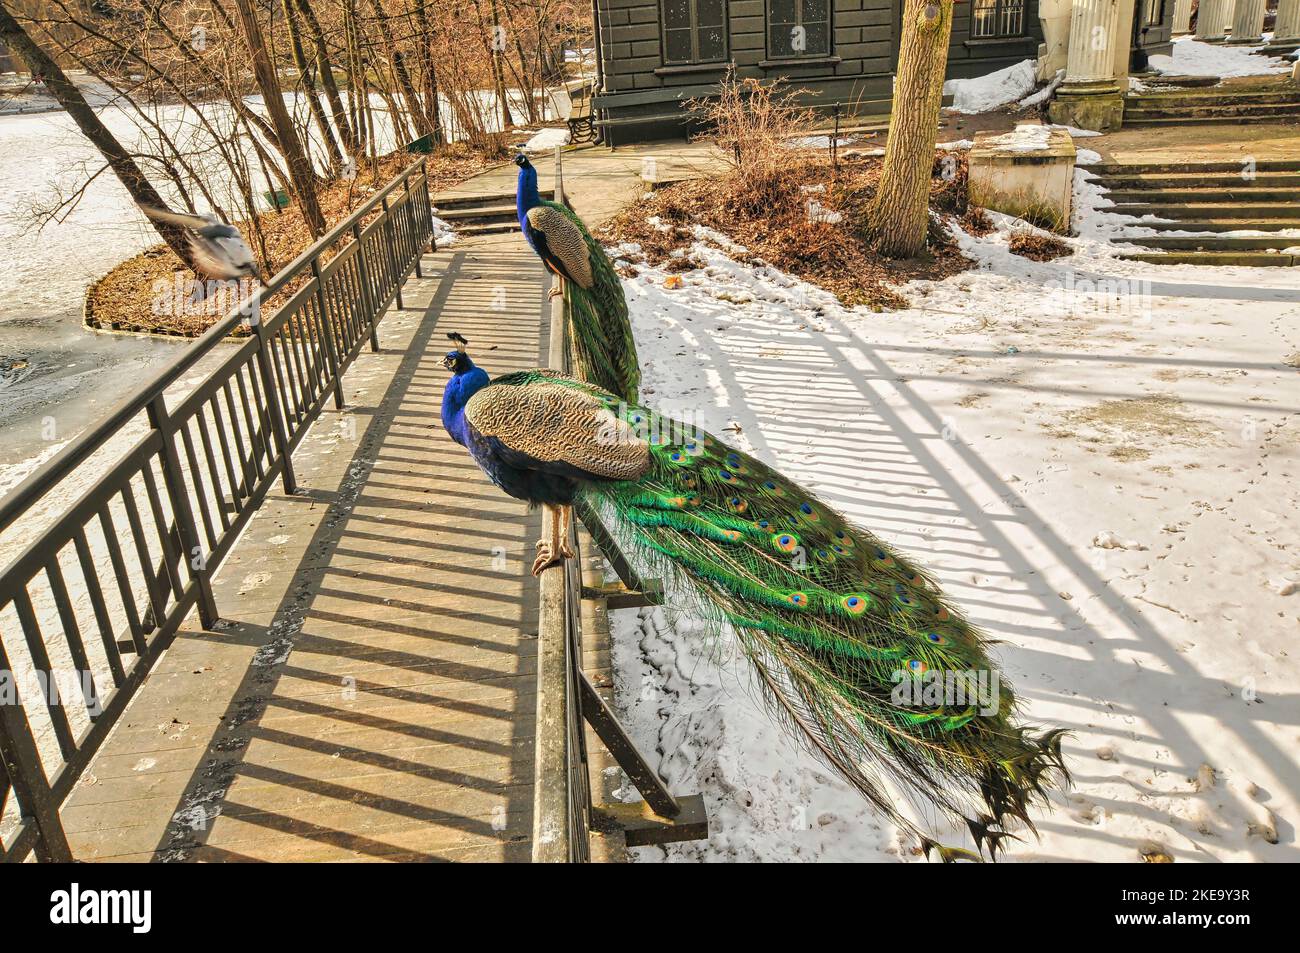 The adorable Peafowls with fabulous tails on wooden bench in Lazienki Krolewskie Park in Poland Stock Photo